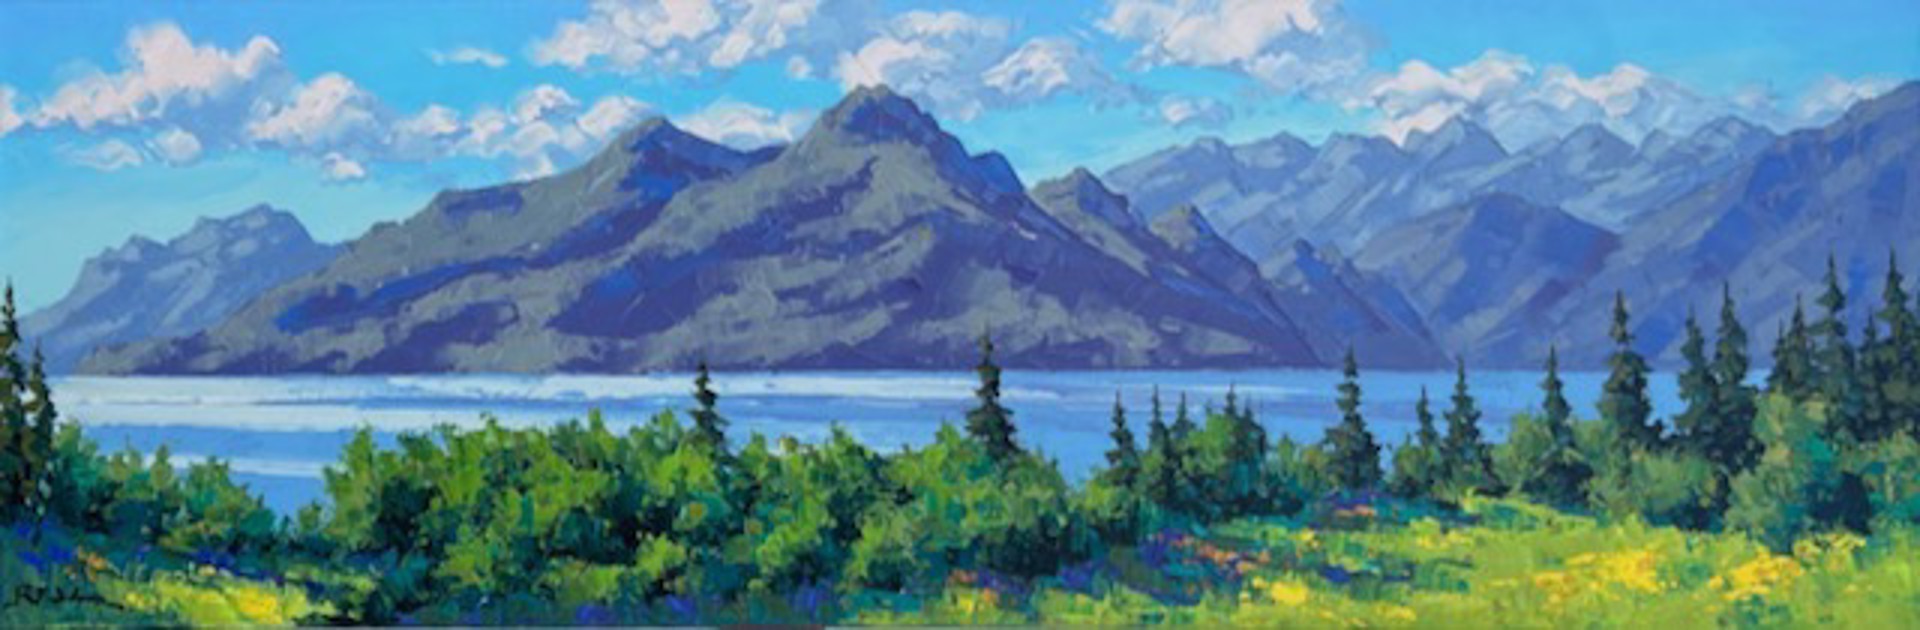 View to Howe Sound by Robert E Wood